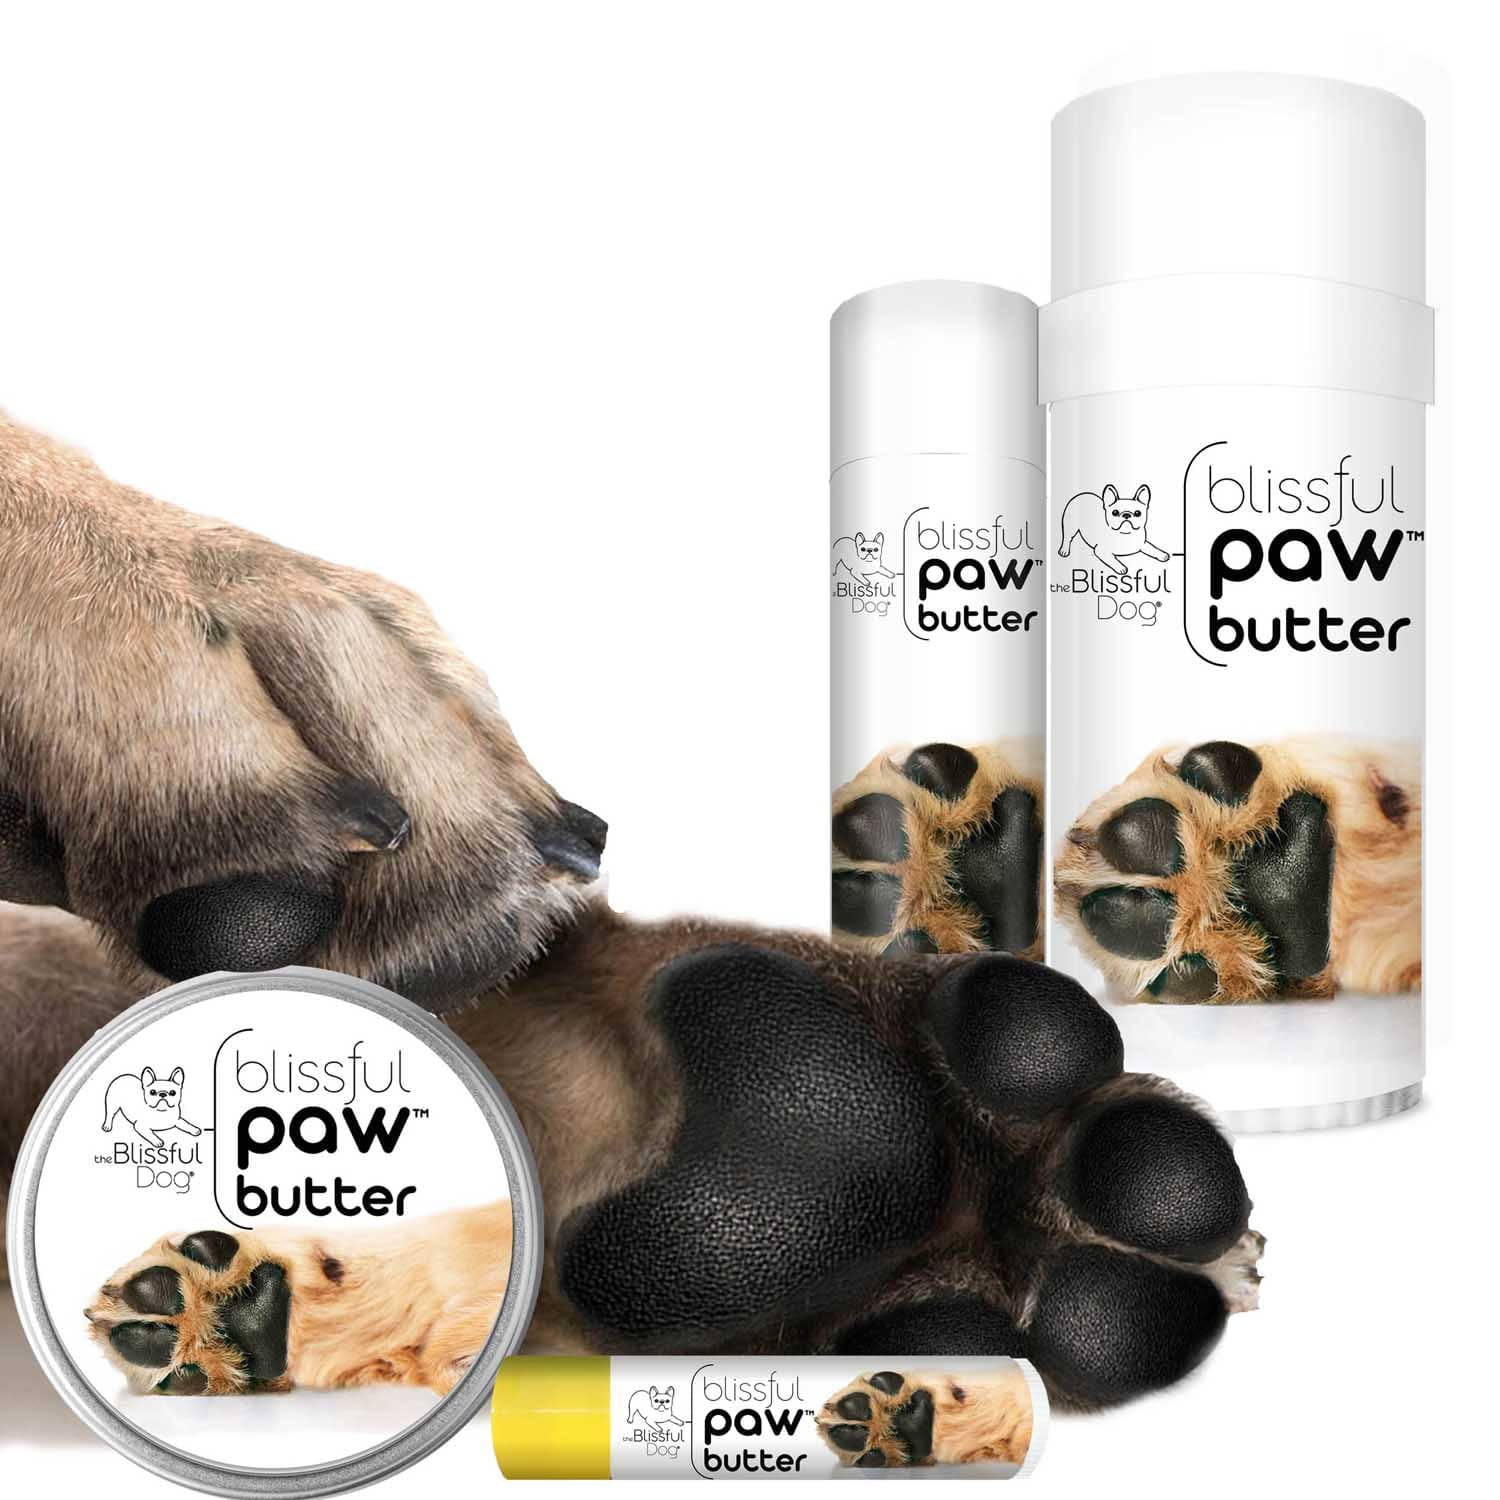 Paw Butter